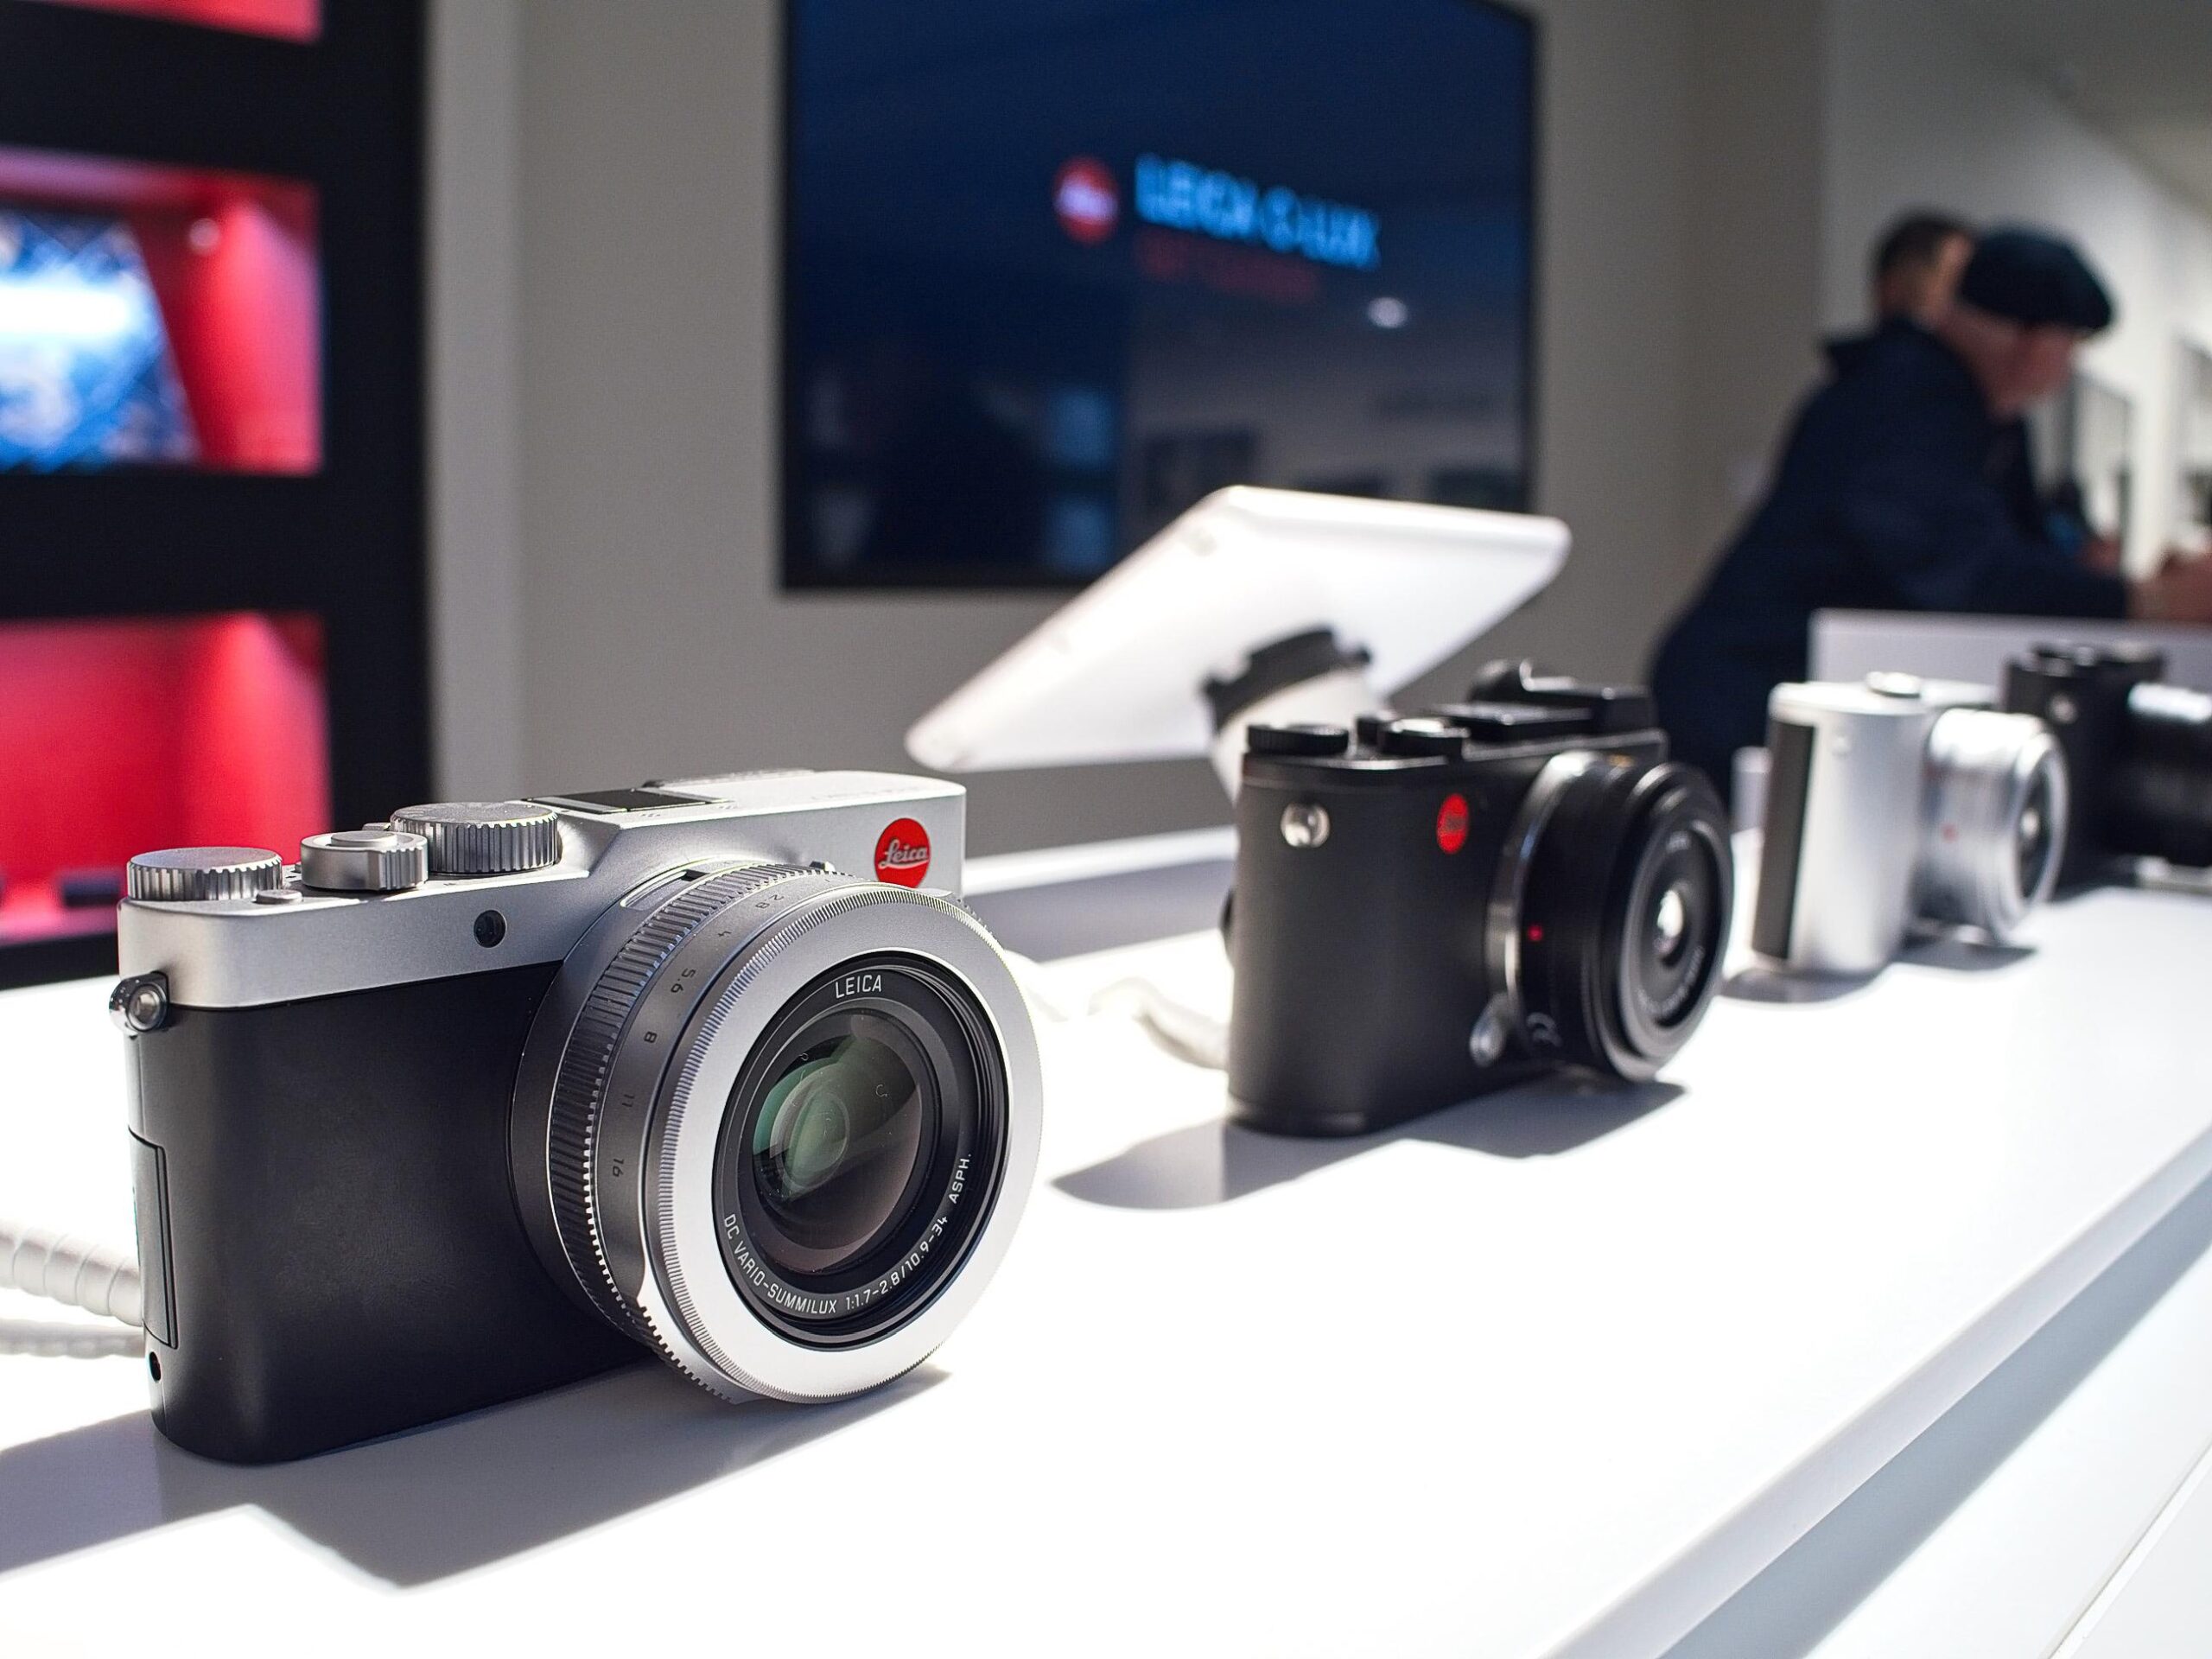 Leica's long association with Panasonic is most apparent in the range of re-branded Lumix cameras such as the D-Lux (seen here), C-Lux and V-Lux. But Panasonic have long used Leica branding on micro four-thirds lenses and "Approved by Leica" on premium L-mount lenses. Image Mike Evans